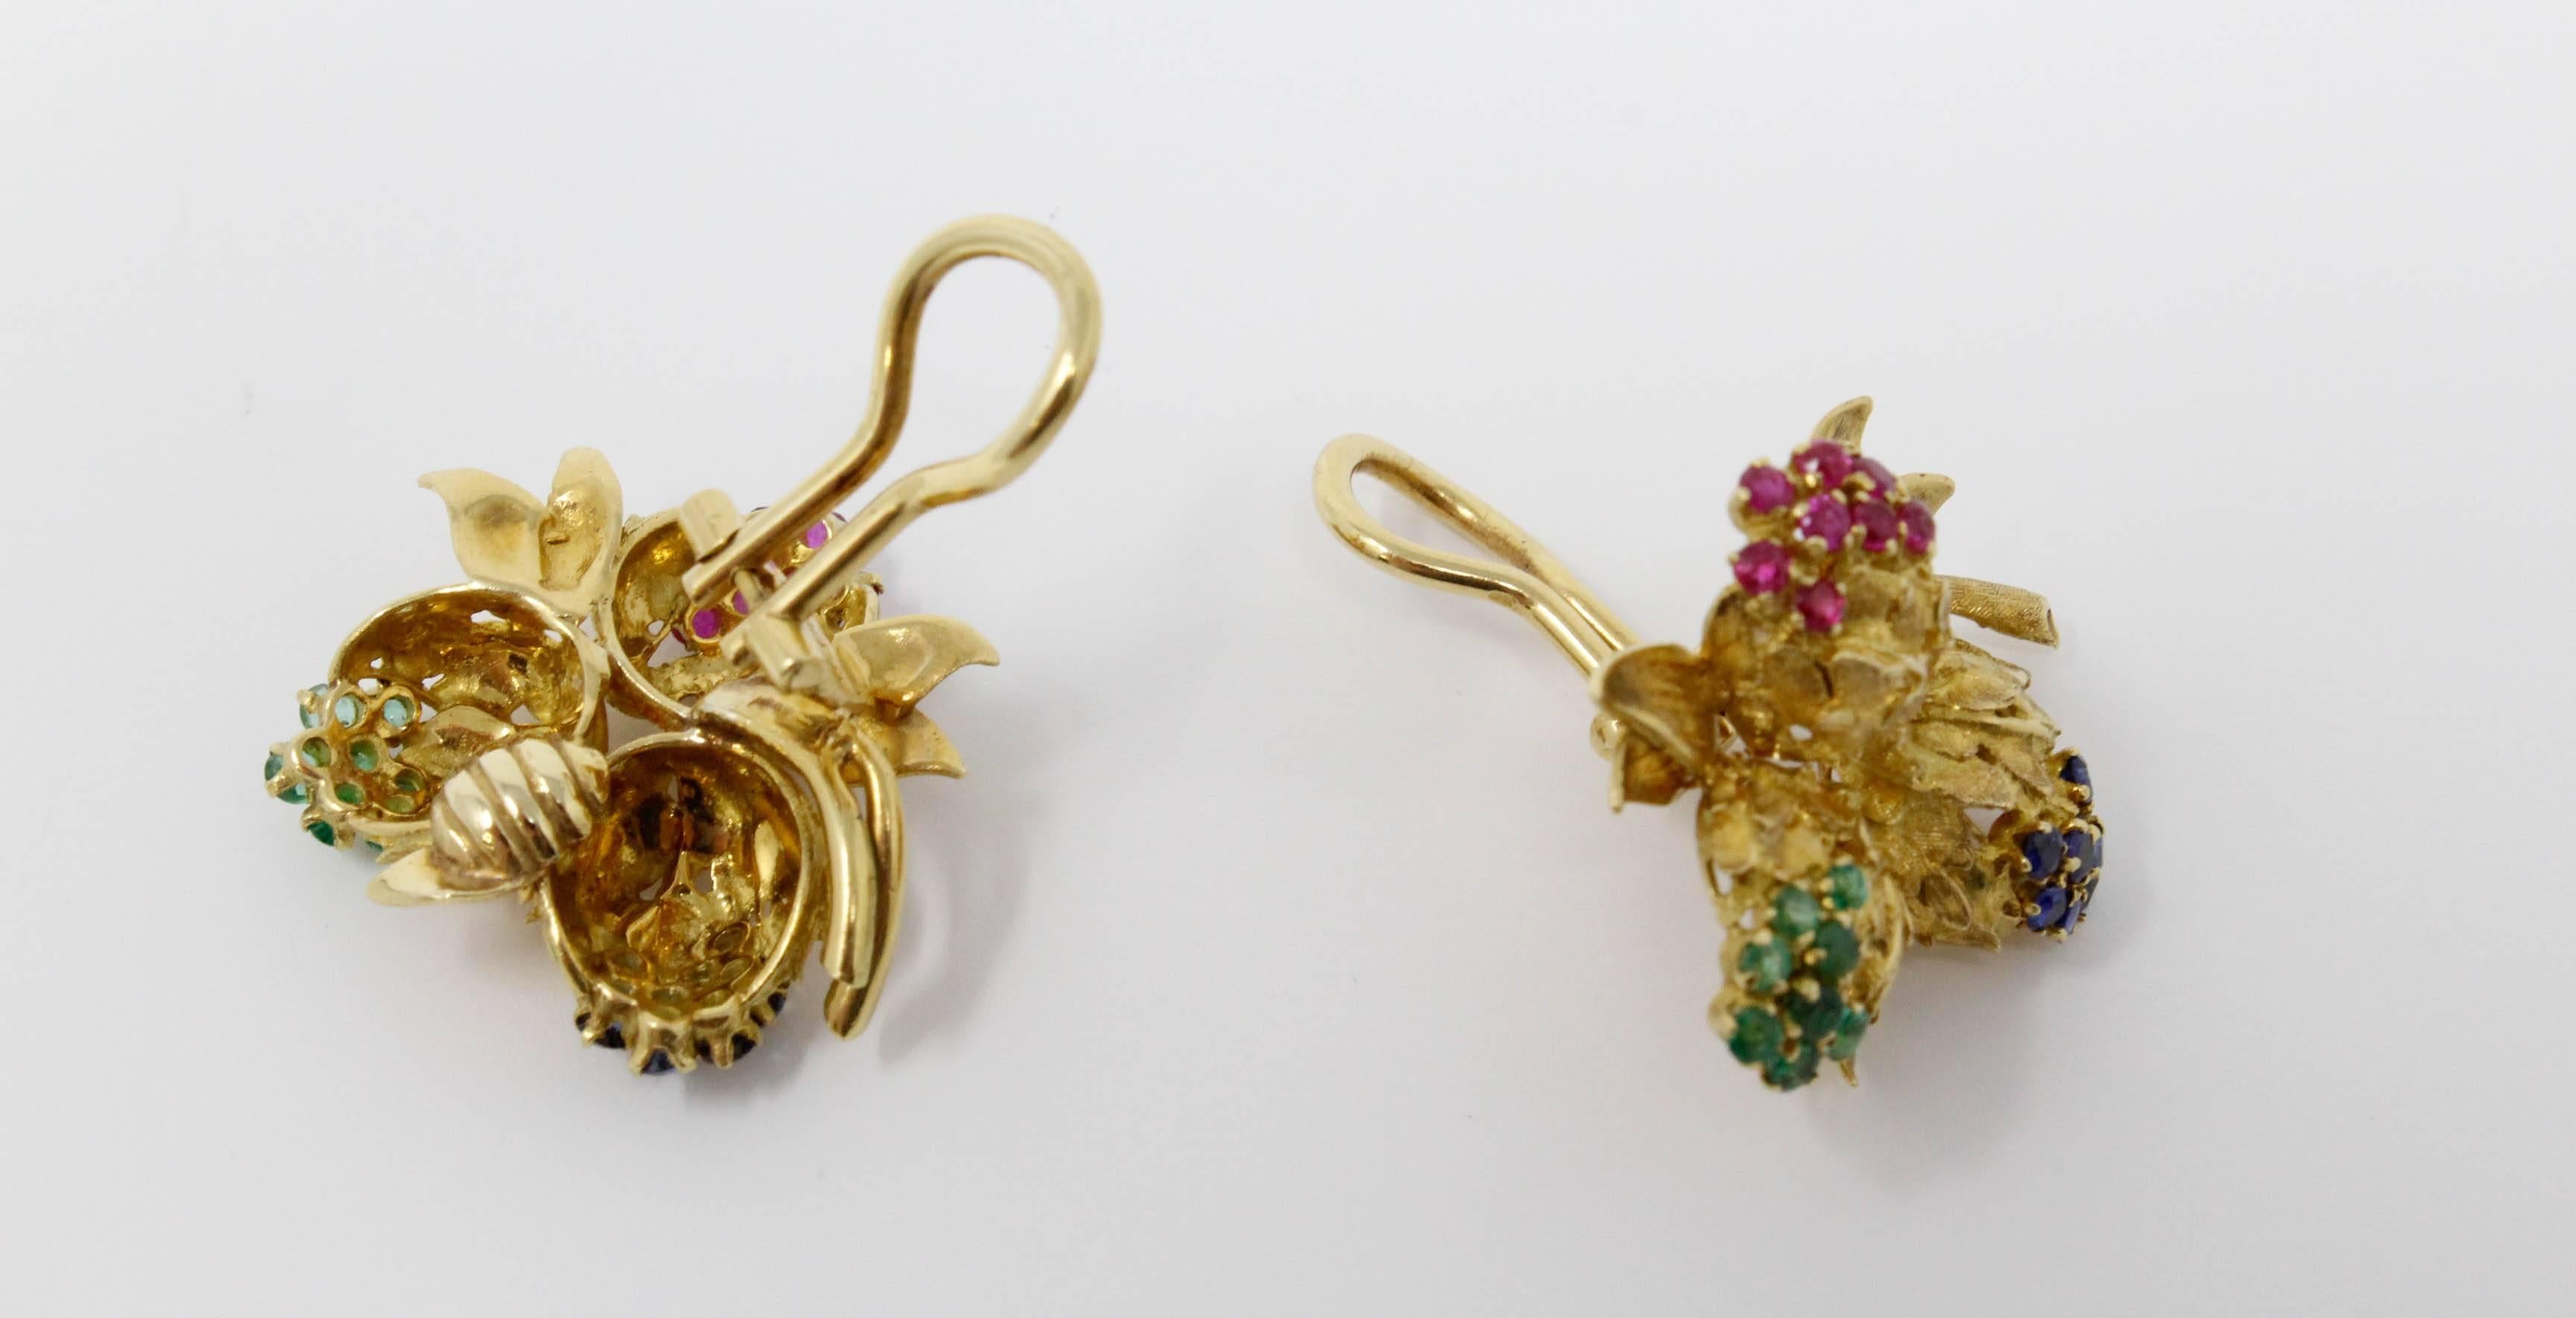 Floral Earrings Set in 18 Karat Yellow Gold with Sapphires, Rubies and Emeralds In Excellent Condition For Sale In Santa Fe, NM